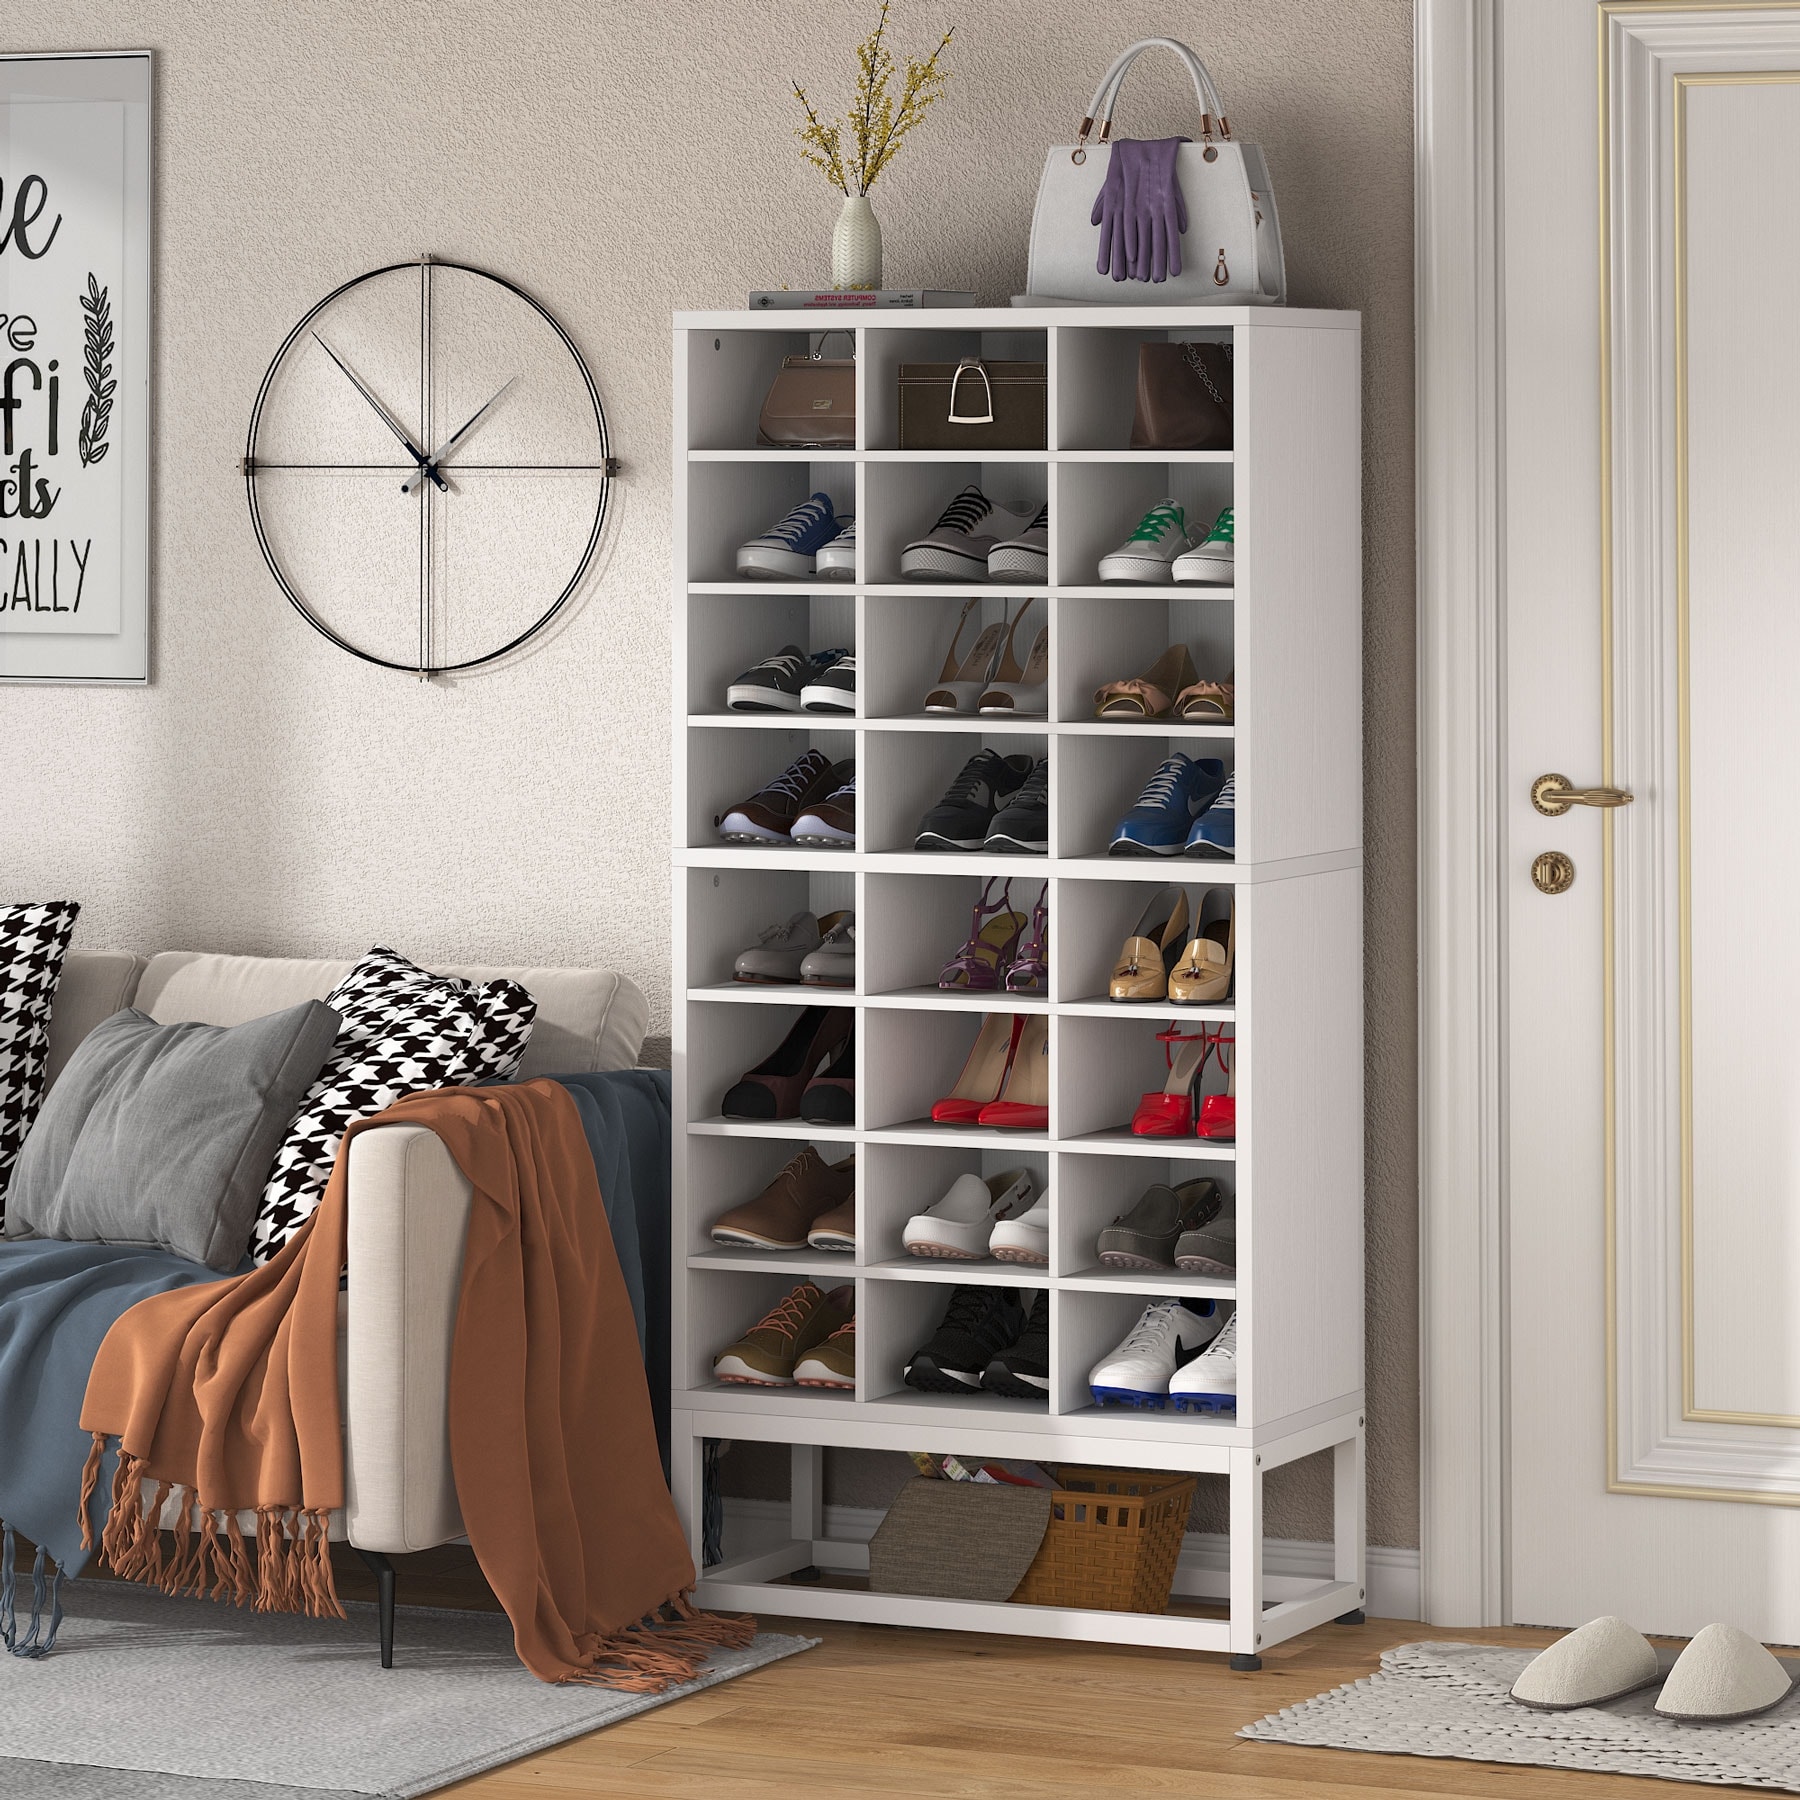 https://ak1.ostkcdn.com/images/products/is/images/direct/3ddca8da75a5e2ab60cffe10772b227301b3b9f2/24-Pair-Shoe-Storage-Cabinet-Adjustable-Shoe-Rack-Organizers%2C-8-Tier-White-Cube-Storage-Bookcase.jpg